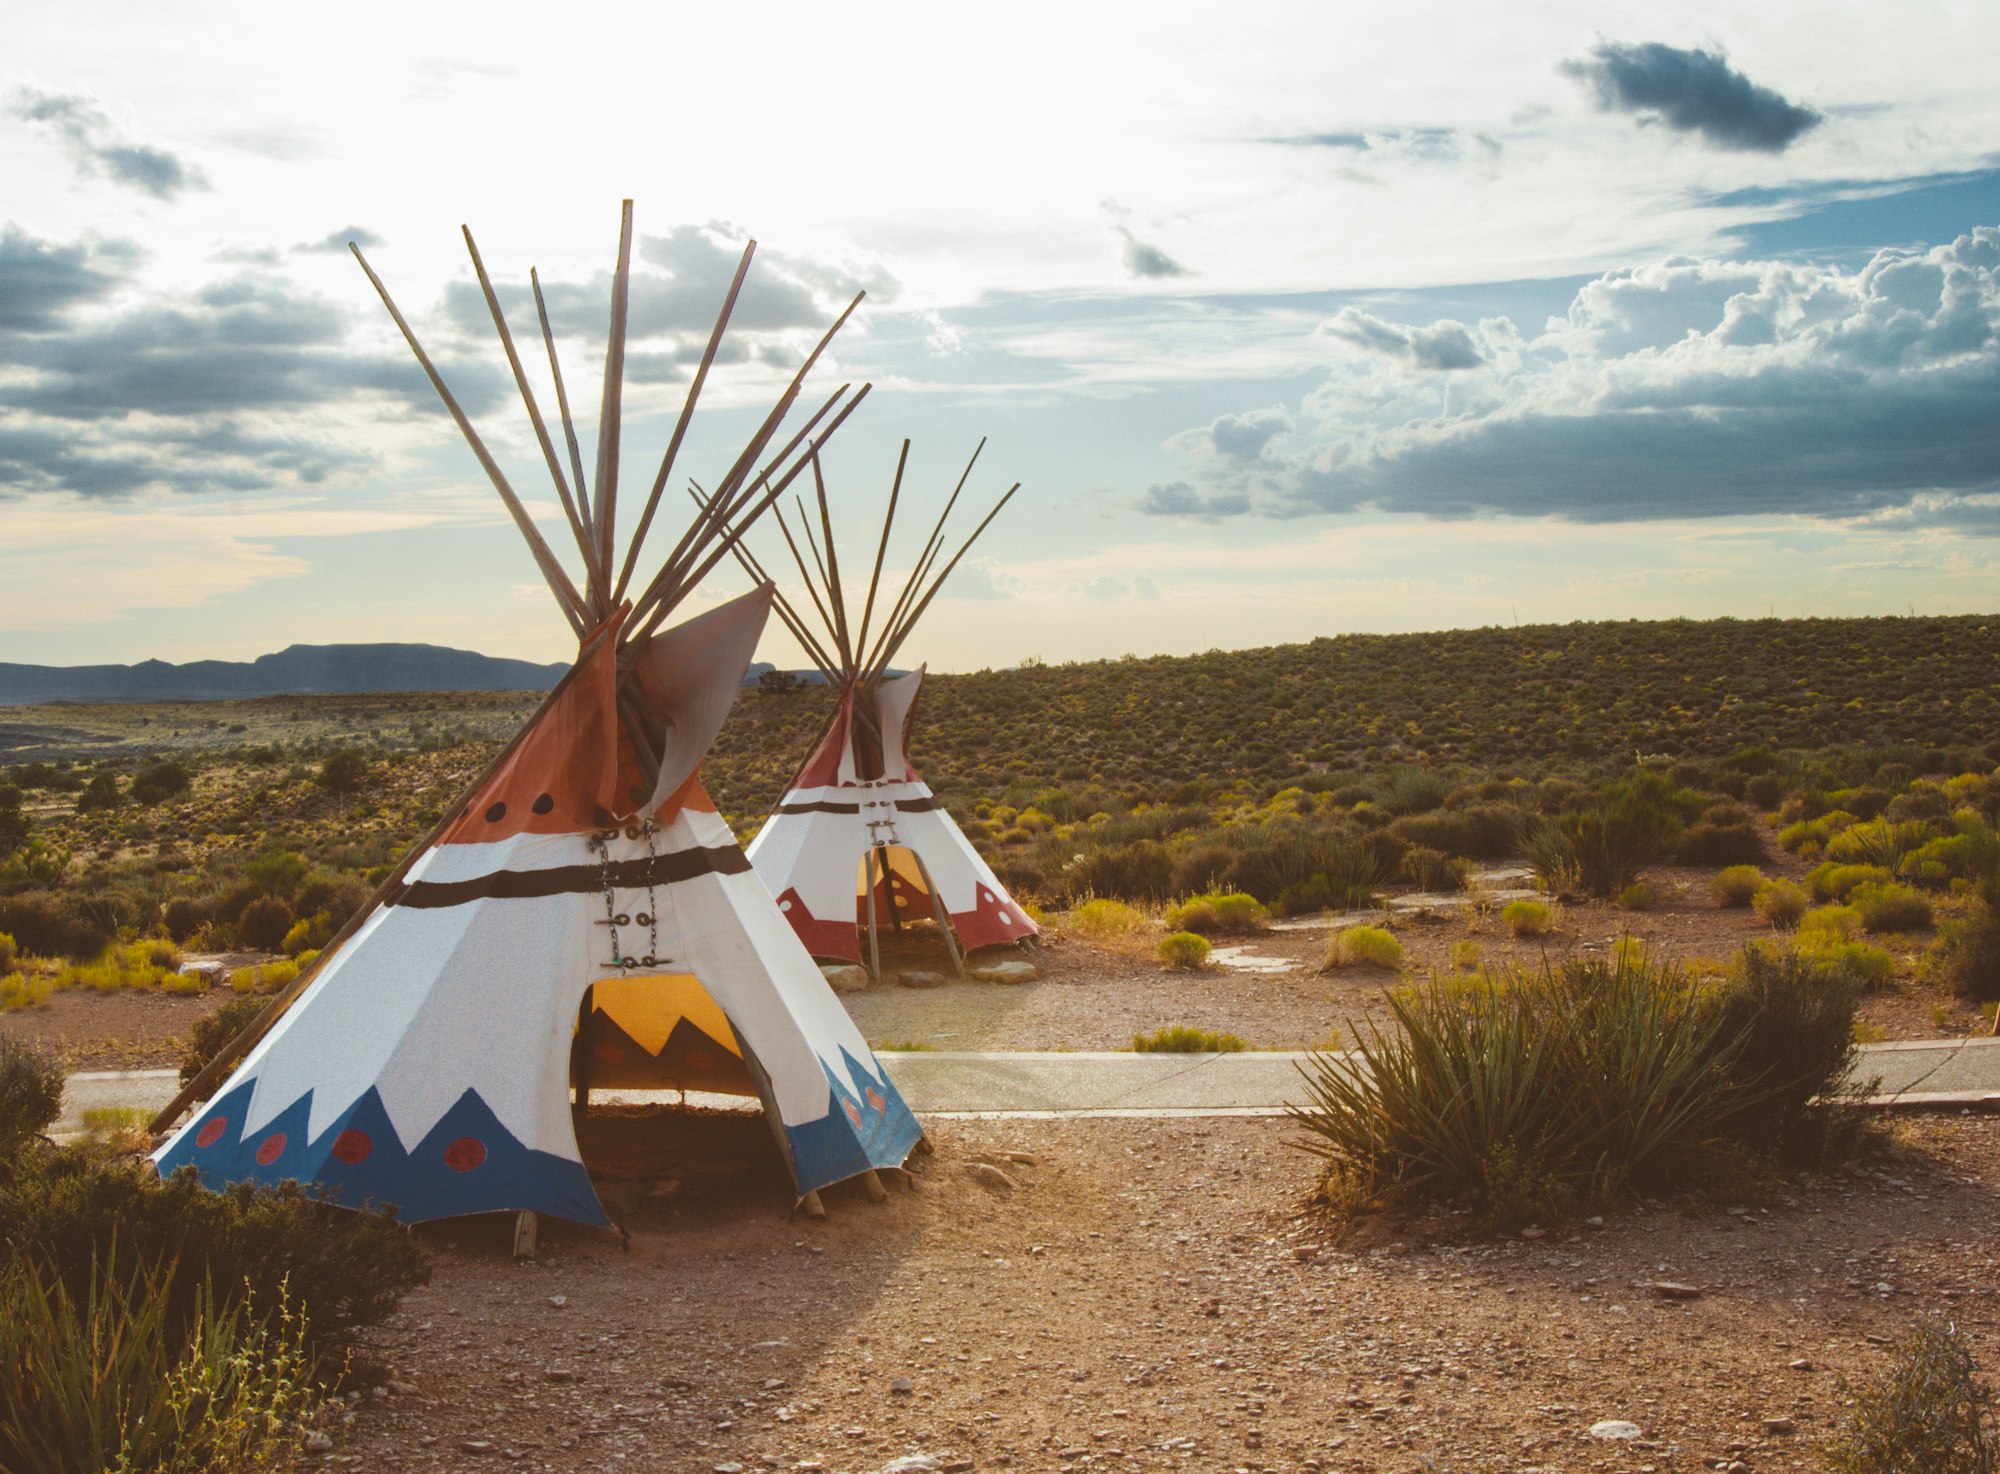 Which State Is Home To The Largest Native American Reservation In The United States?